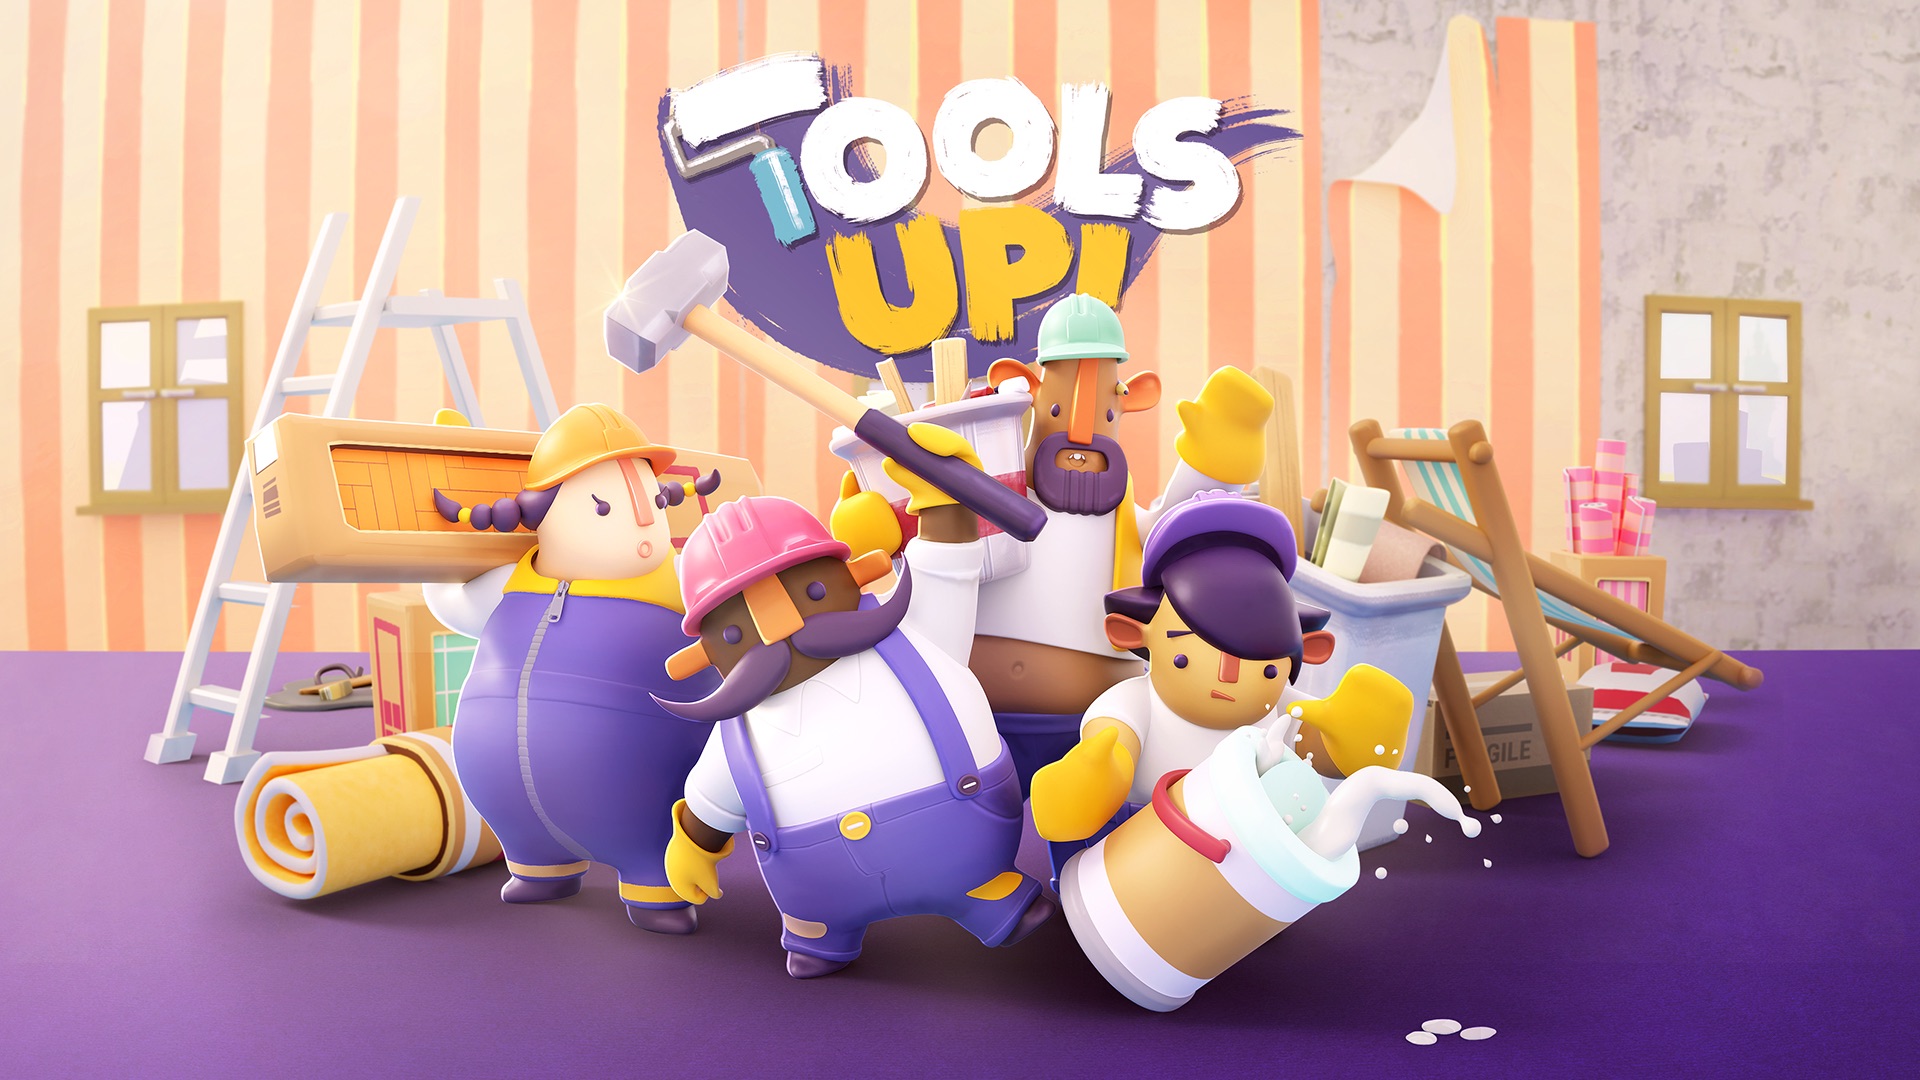 Tools Up! for Nintendo Switch - Nintendo Game Details 搬家游戏